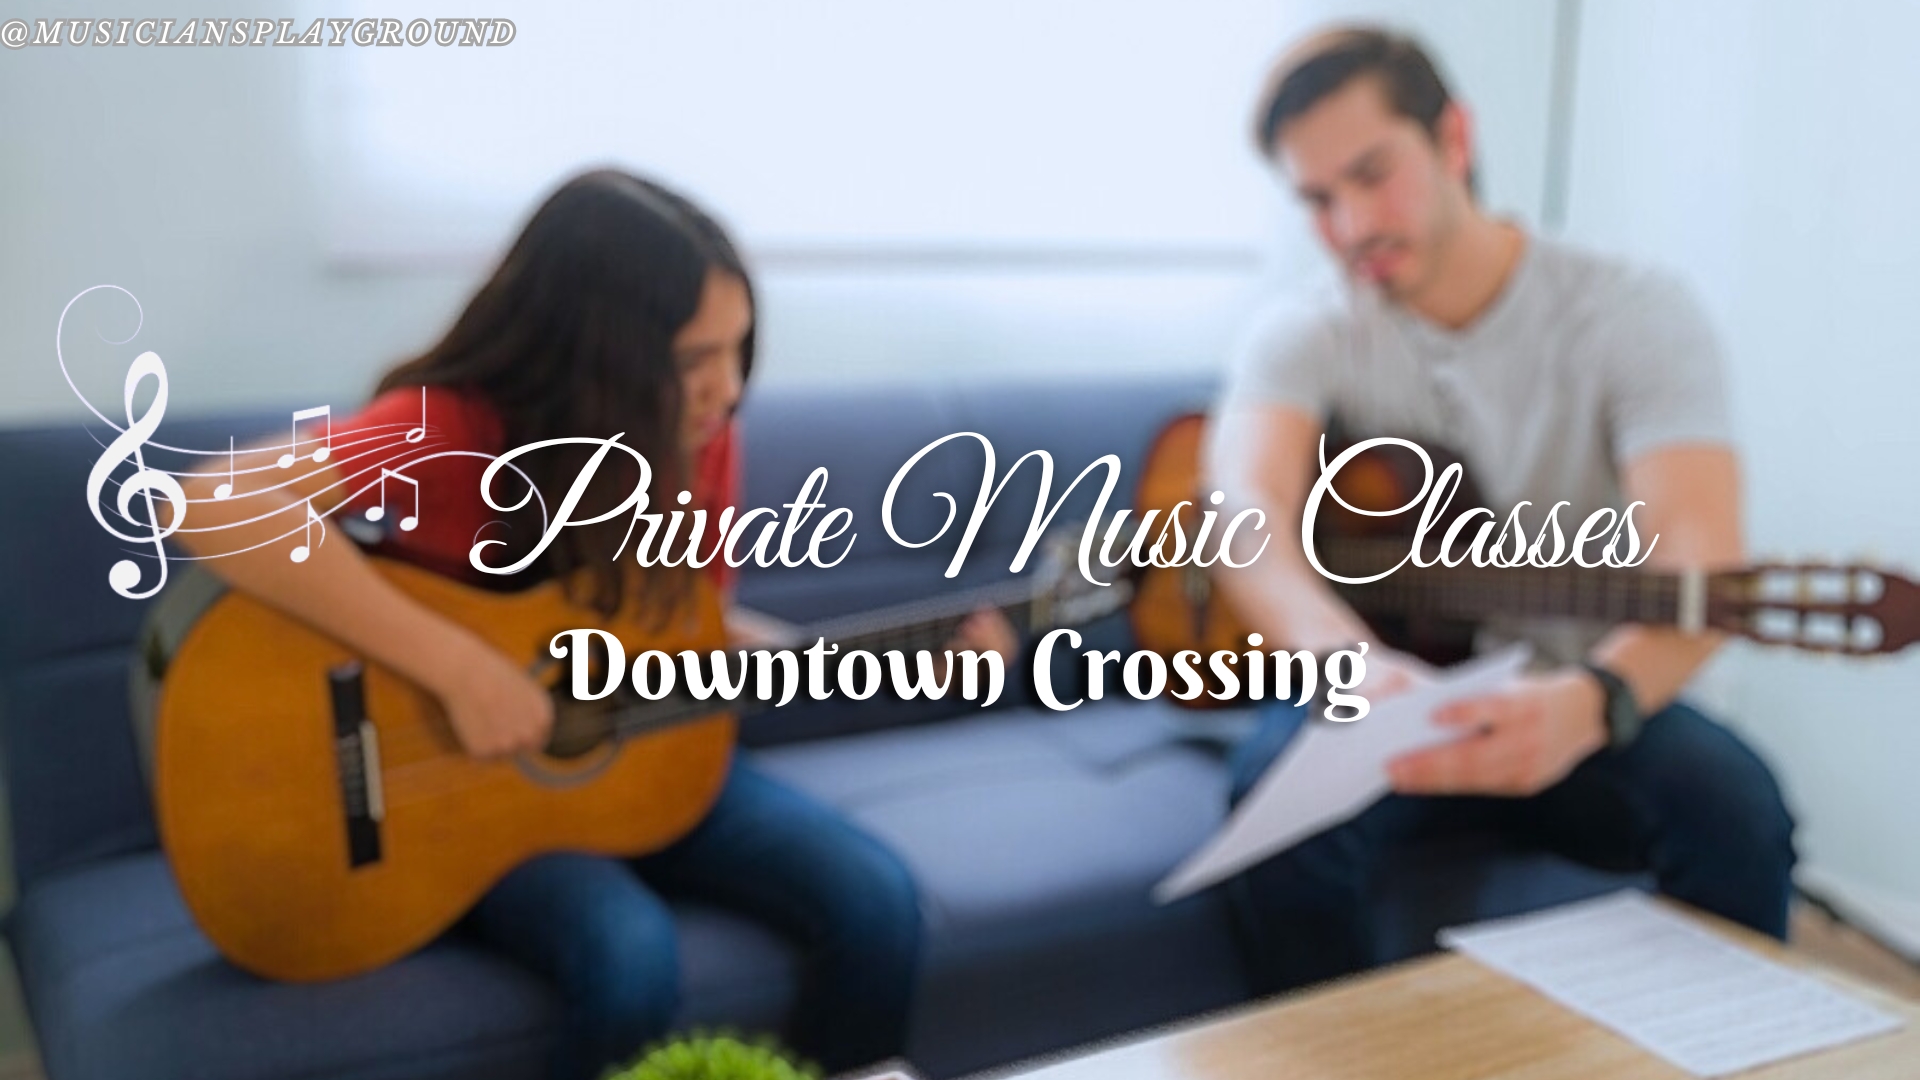 Welcome to Musicians Playground: Private Music Lessons in Downtown Crossing, Massachusetts